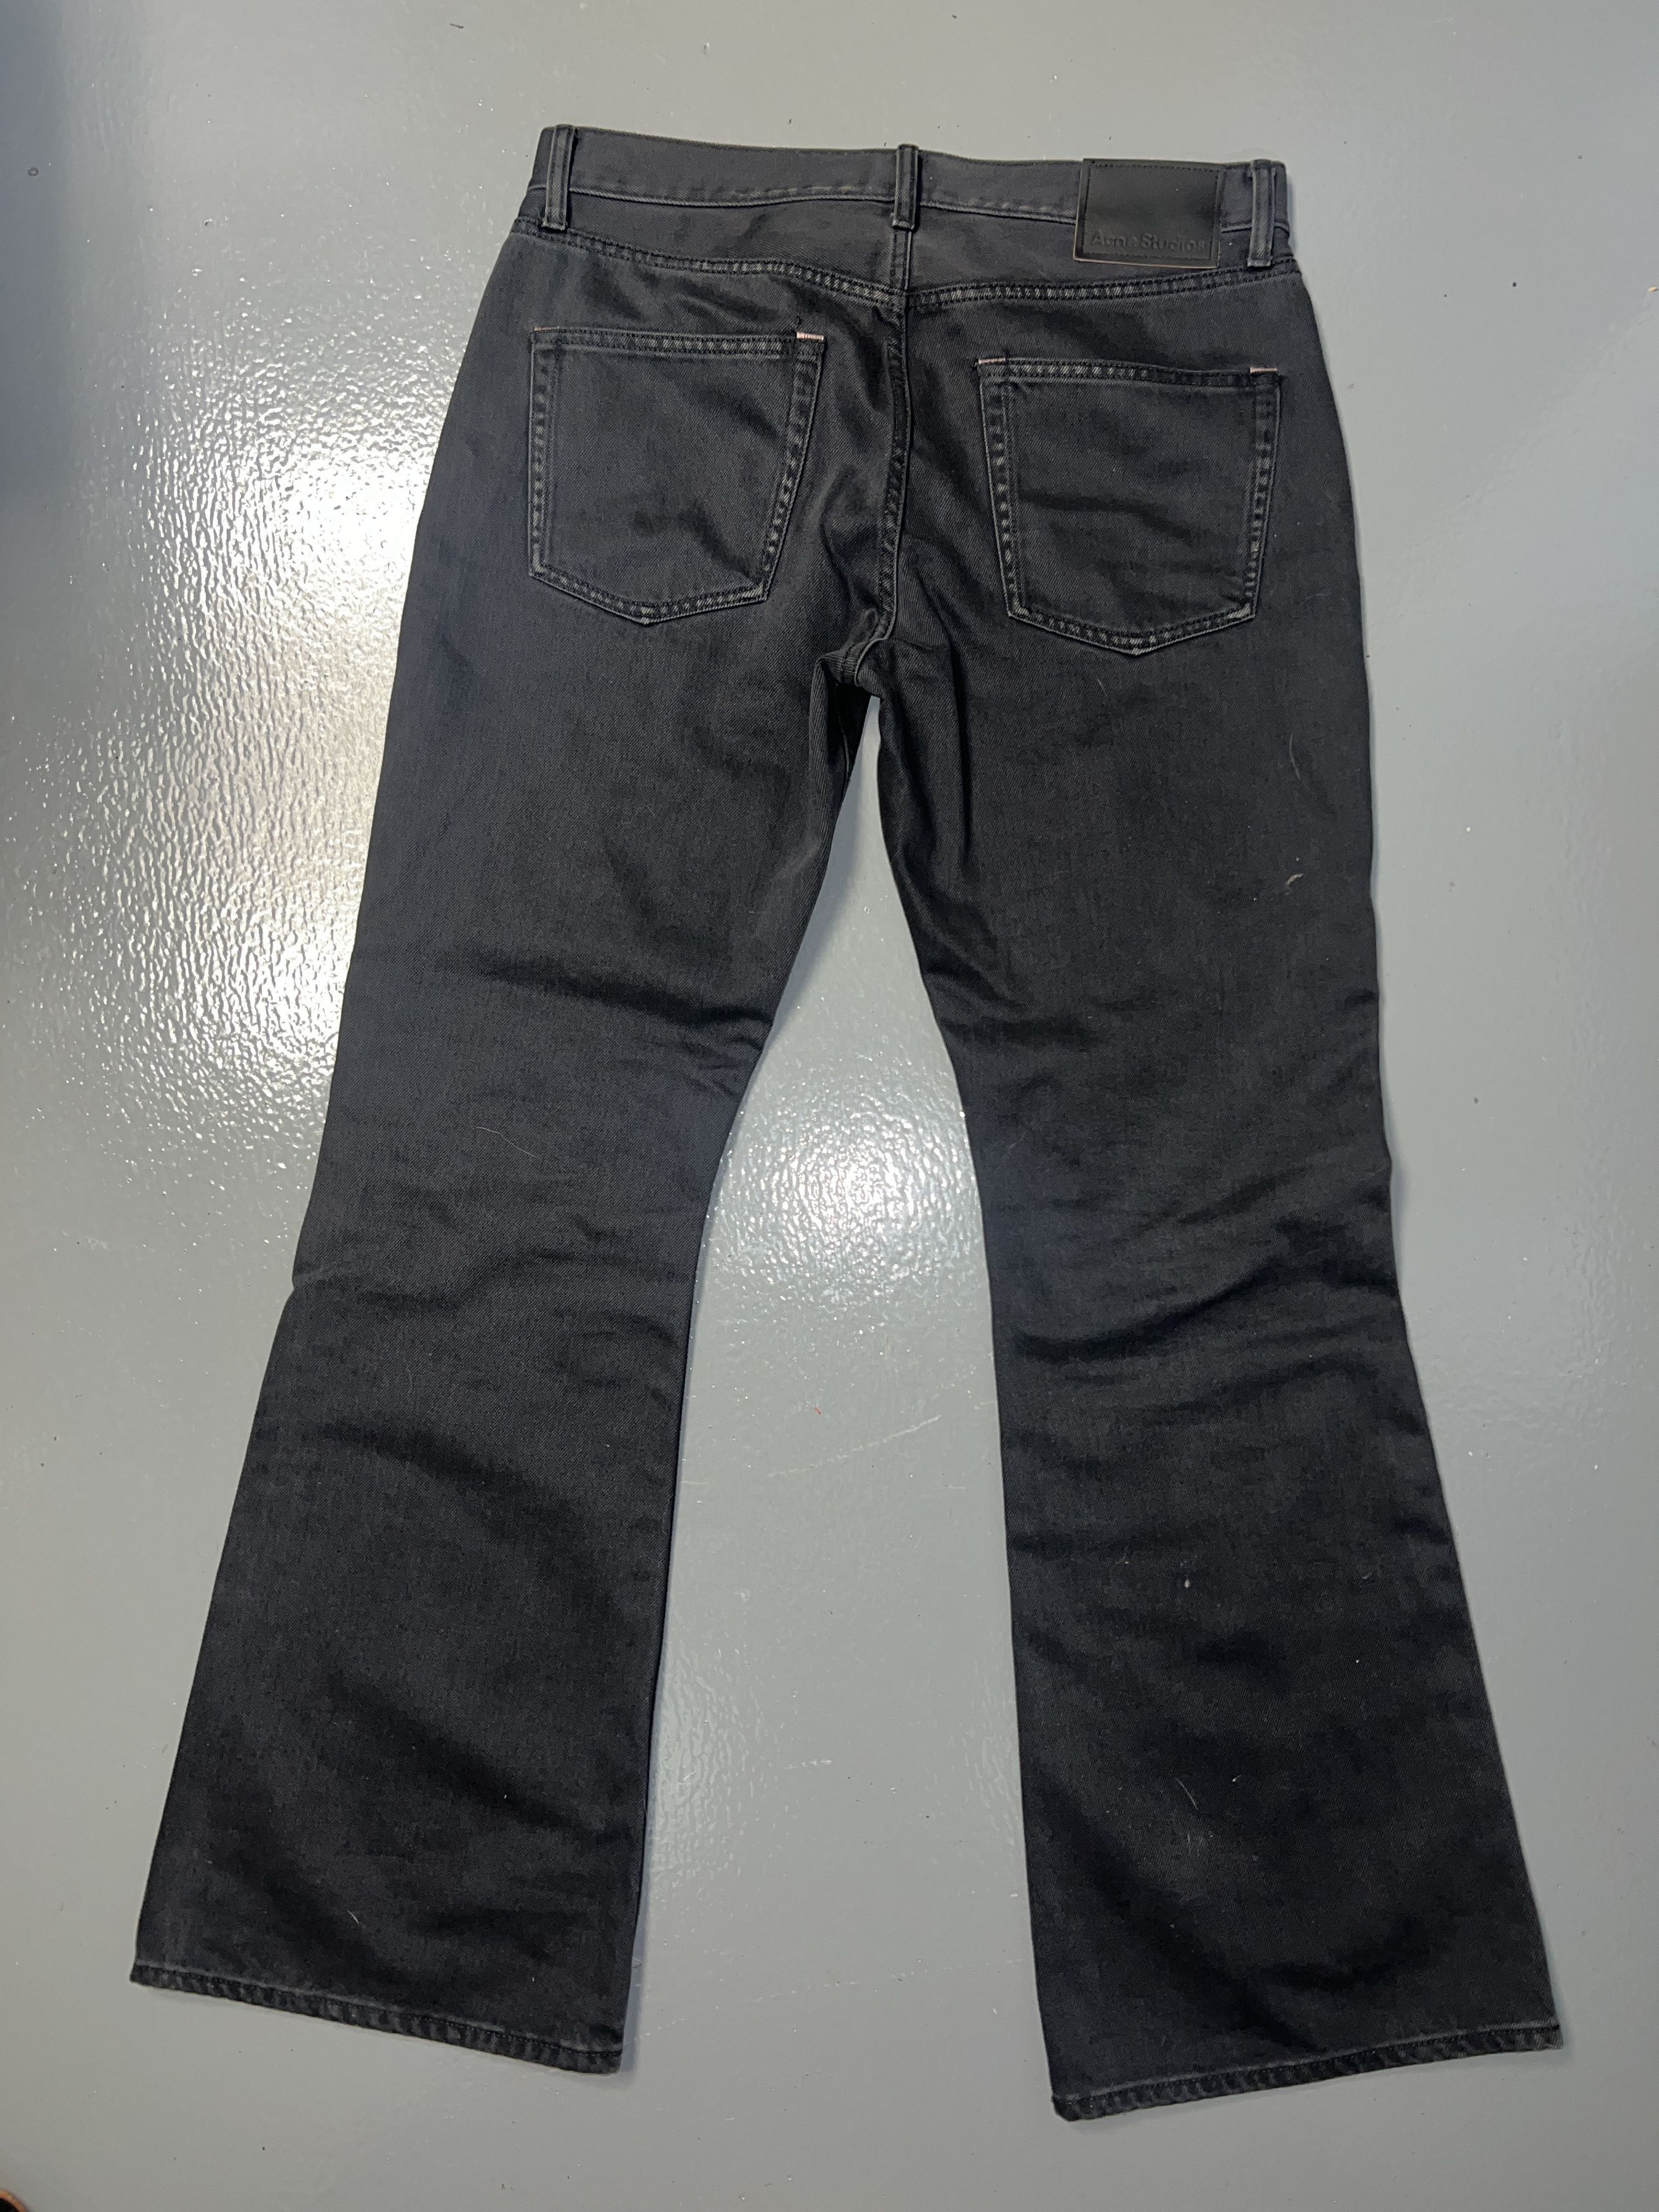 Acne Studios 1992 Flared Jeans Size US 34 / EU 50 - 2 Preview